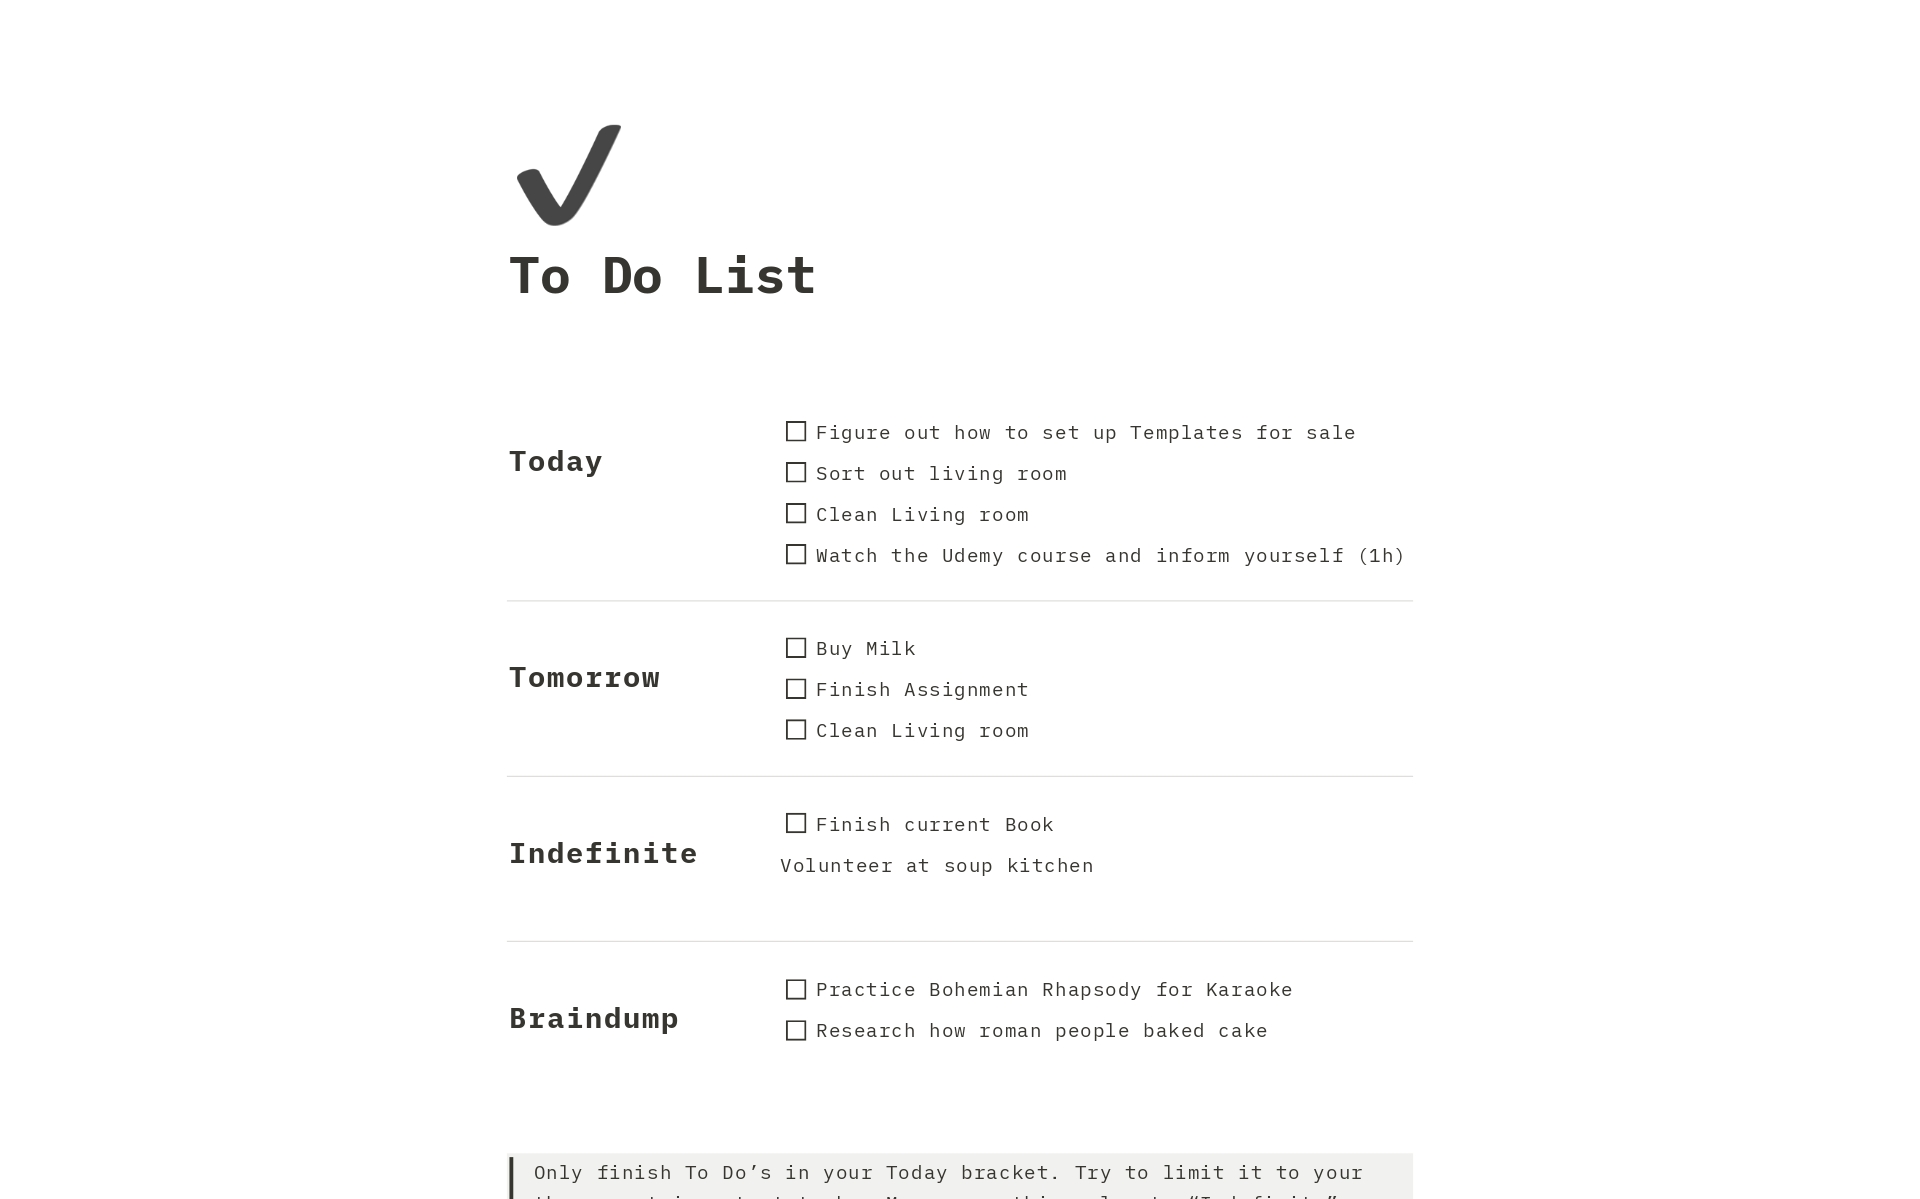 Extrenely reduced To-Do list template for efficient & effective productivity. (ADHD friendly version)